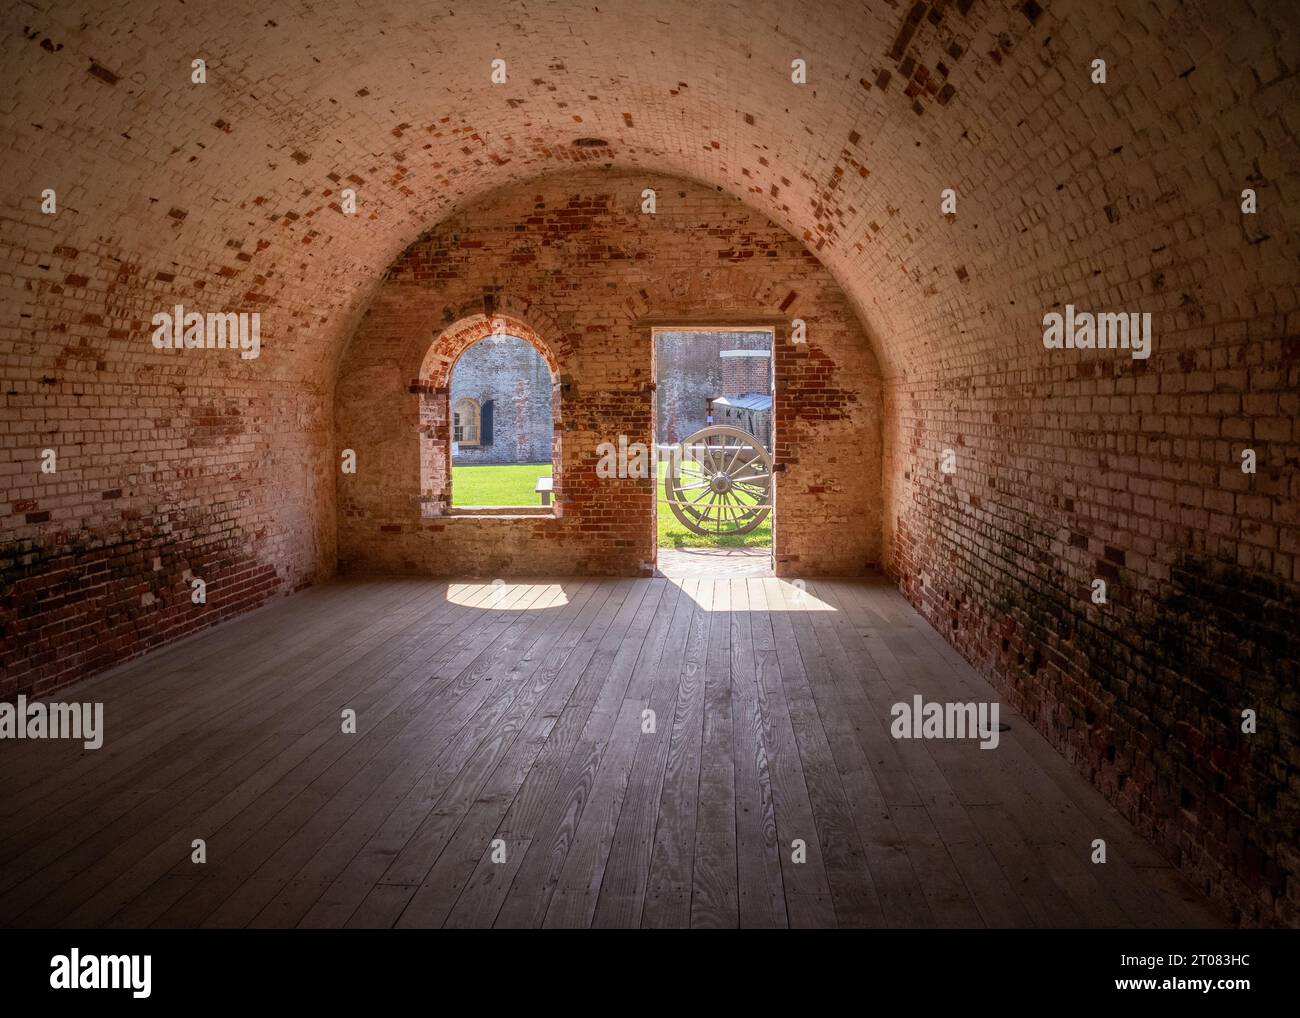 View from inside of fort looking into courtyard, Fort Macon SP, NC Stock Photo